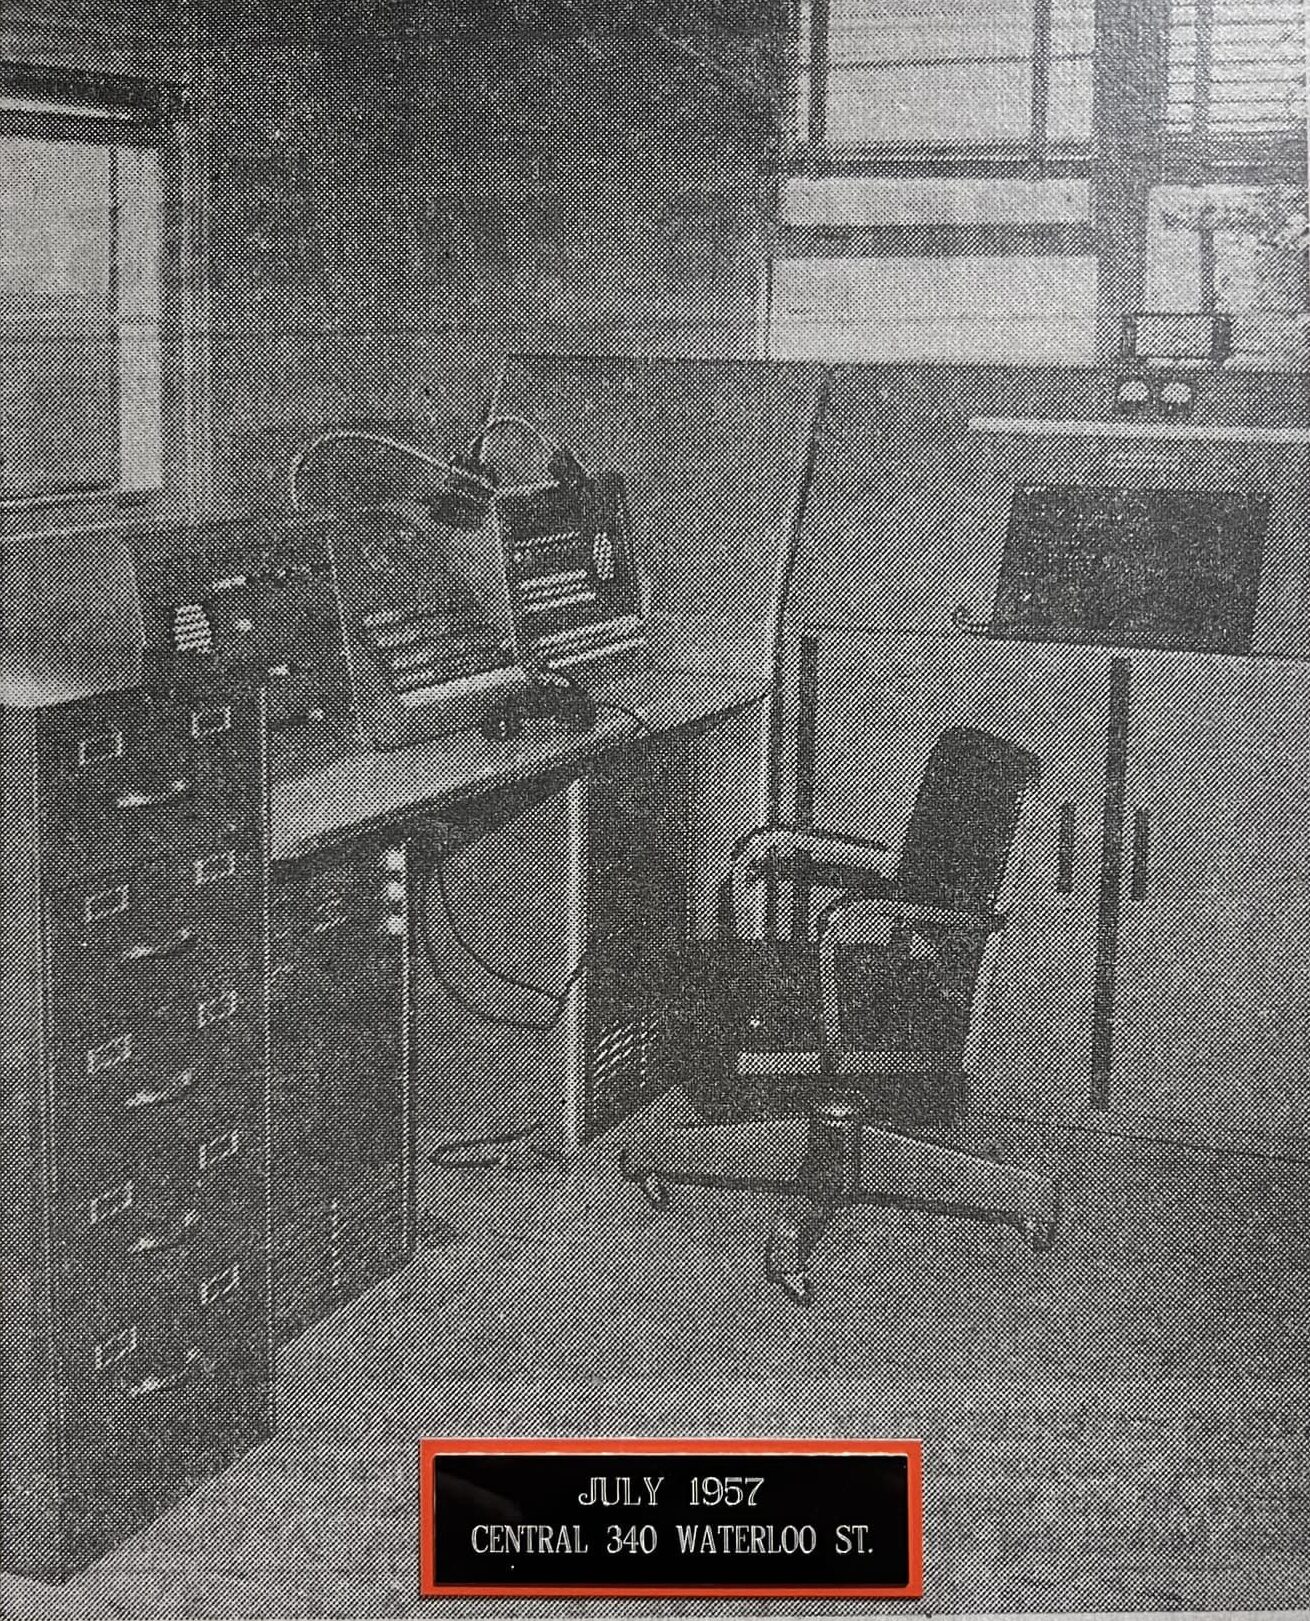 The new dispatcher’s office contains the very latest in electronics and telephonic communications sets. The dispatcher can speak to all parts of the building by public address system, cal all other stations, workshop and radio equipped vehicles by either telephone or radio or both, and control all street sirens. (Source: Jim Fitzgerald)